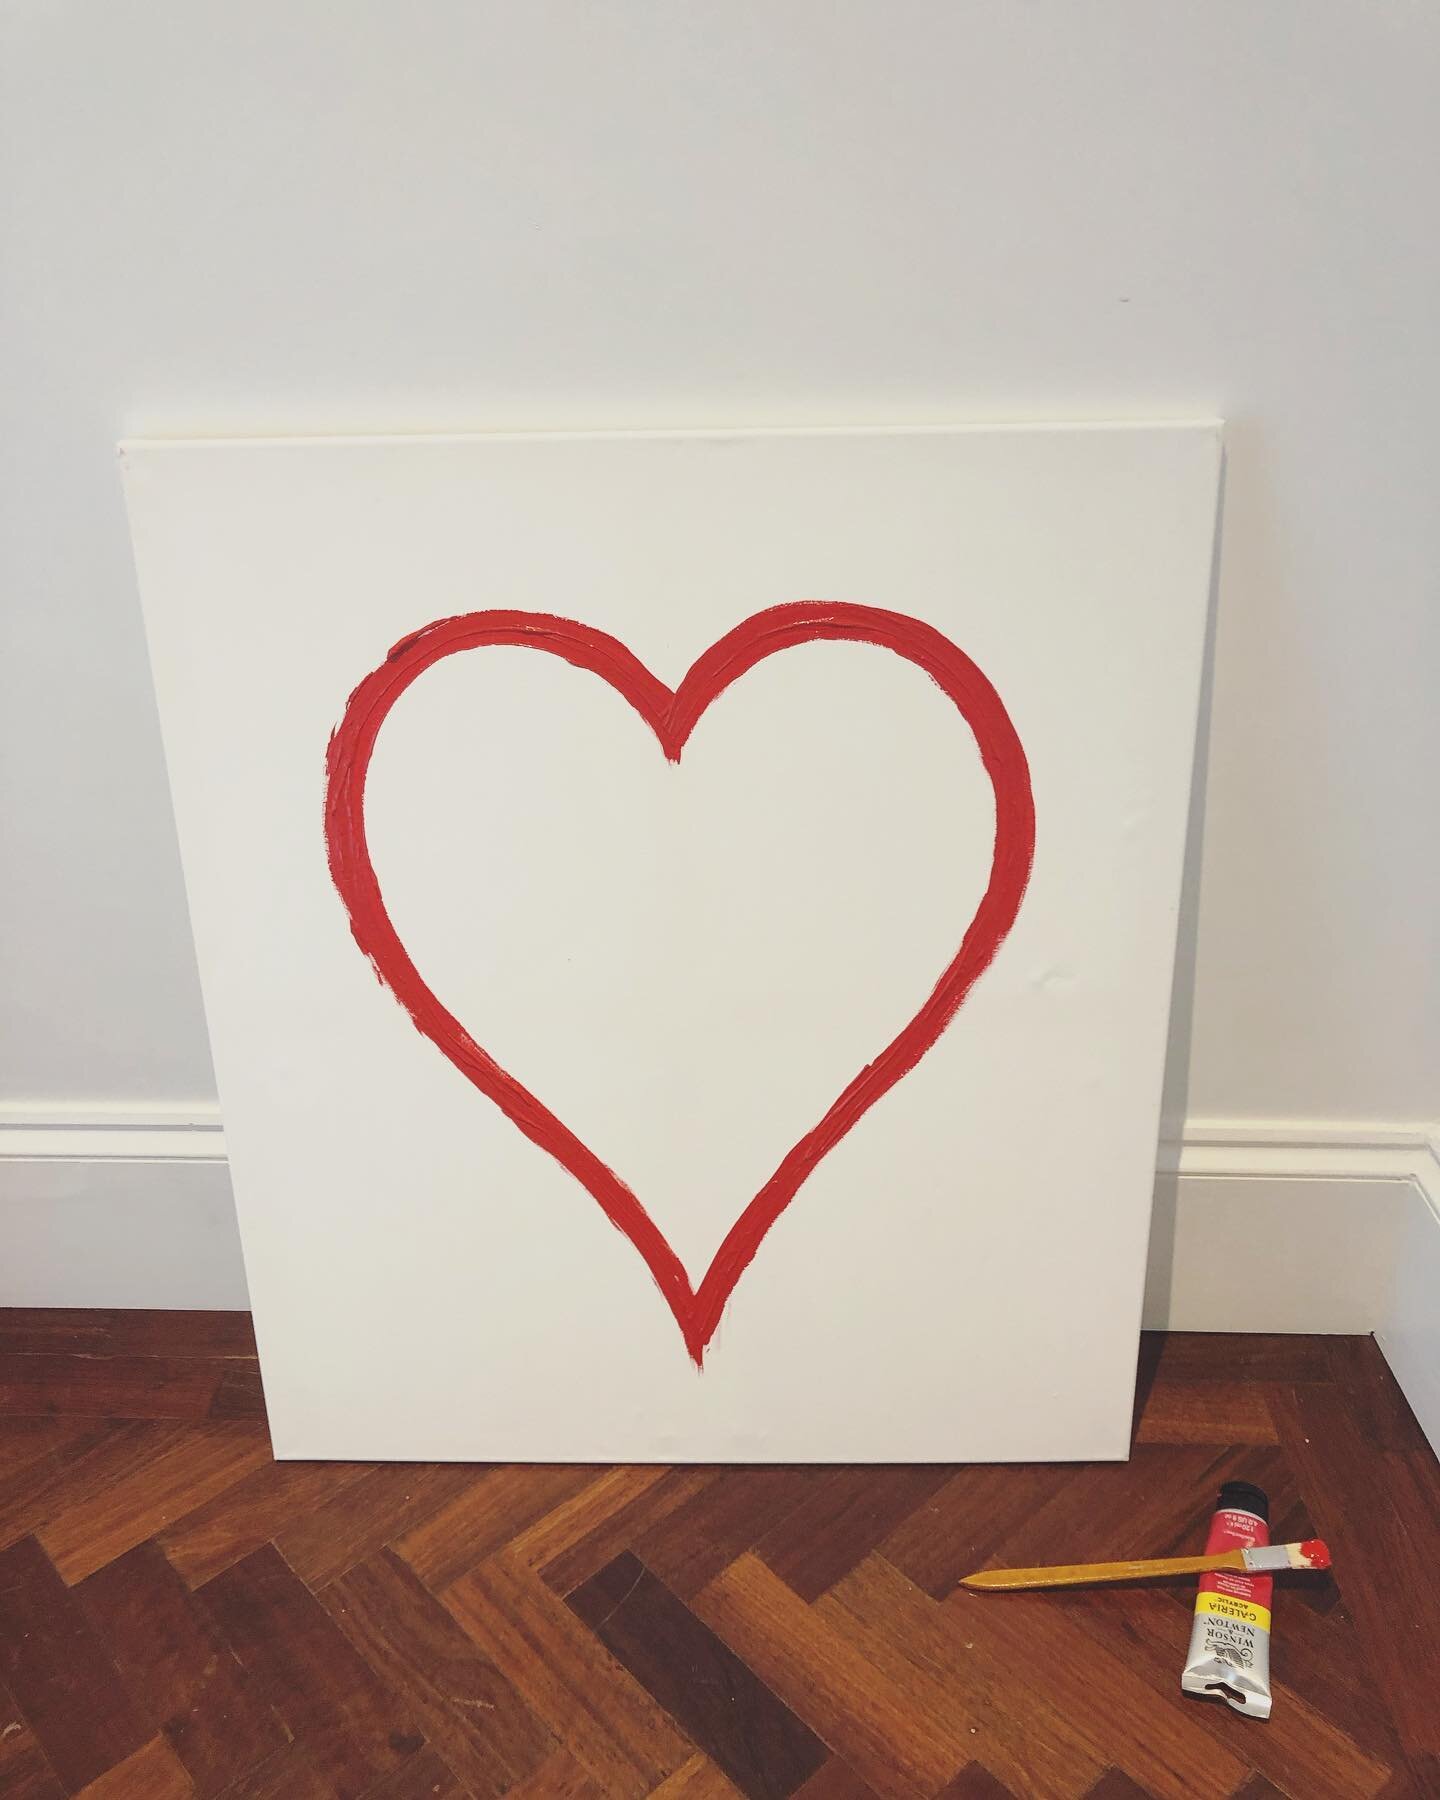 On set prop design with @nextofficial Happy Vals day &hearts;️
-
-
-
-
-
#akoradesign #graphicdesign #graphics #artdirection #prop #creative #create #design #paint #photography #heart #graphicdesigner #valentines #artdirector #creativedesign #inspira